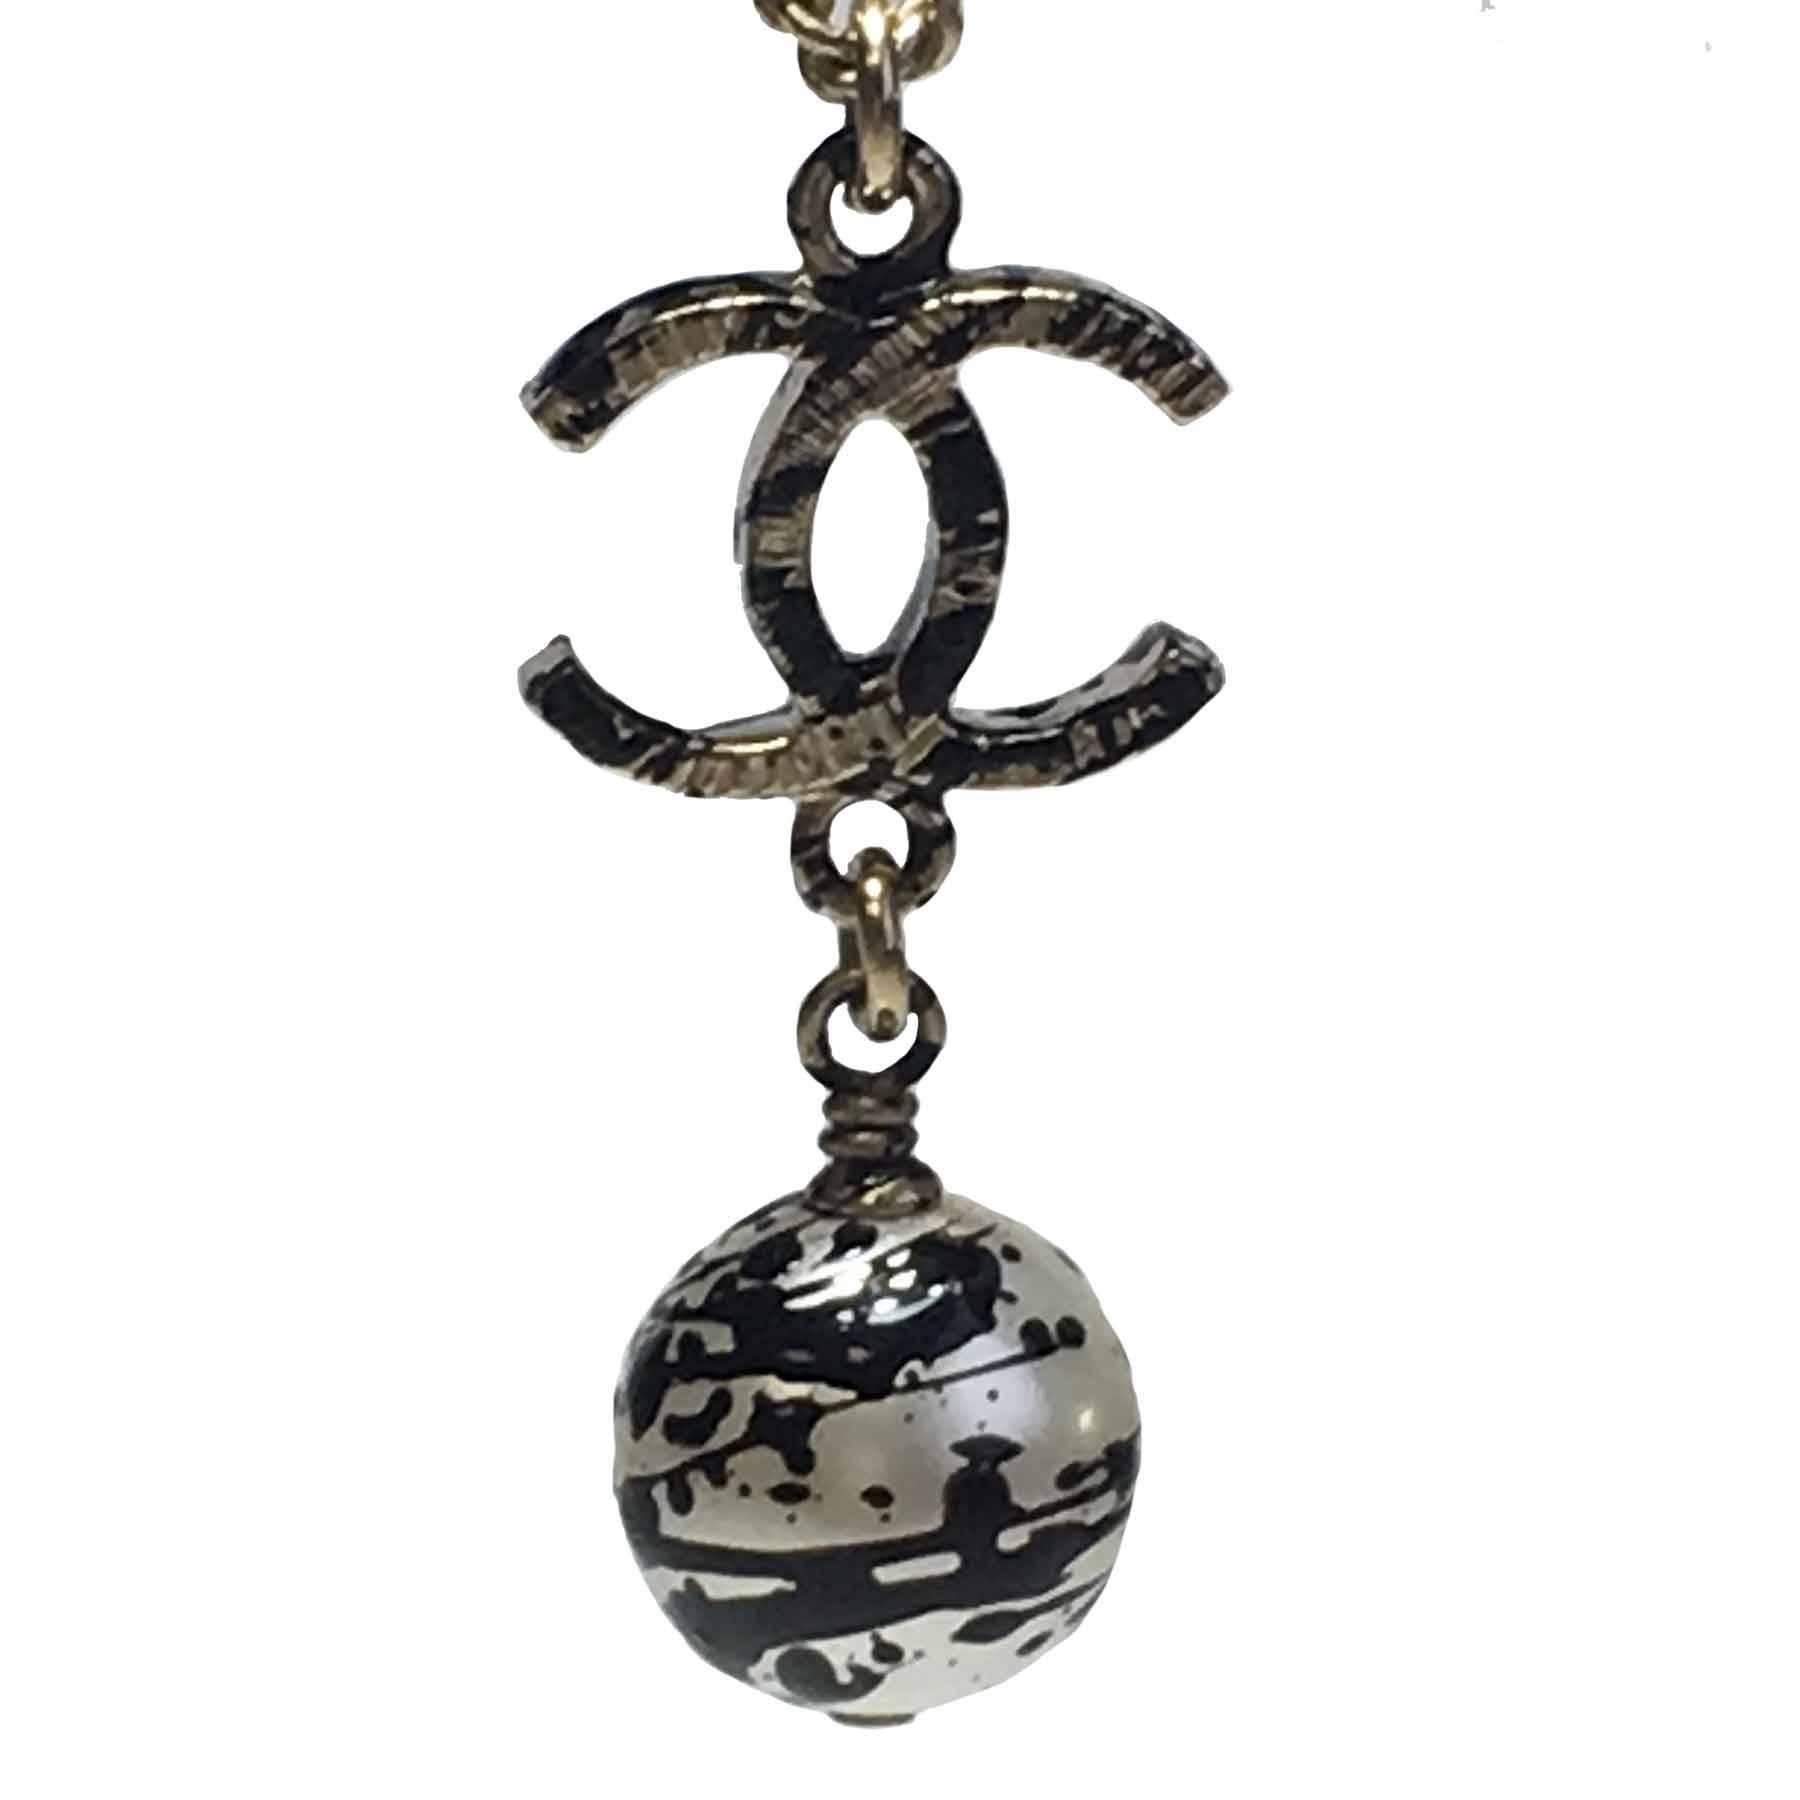 Women's CHANEL Pendant Necklace in Gilded Metal and Pearl with Graffiti Effect